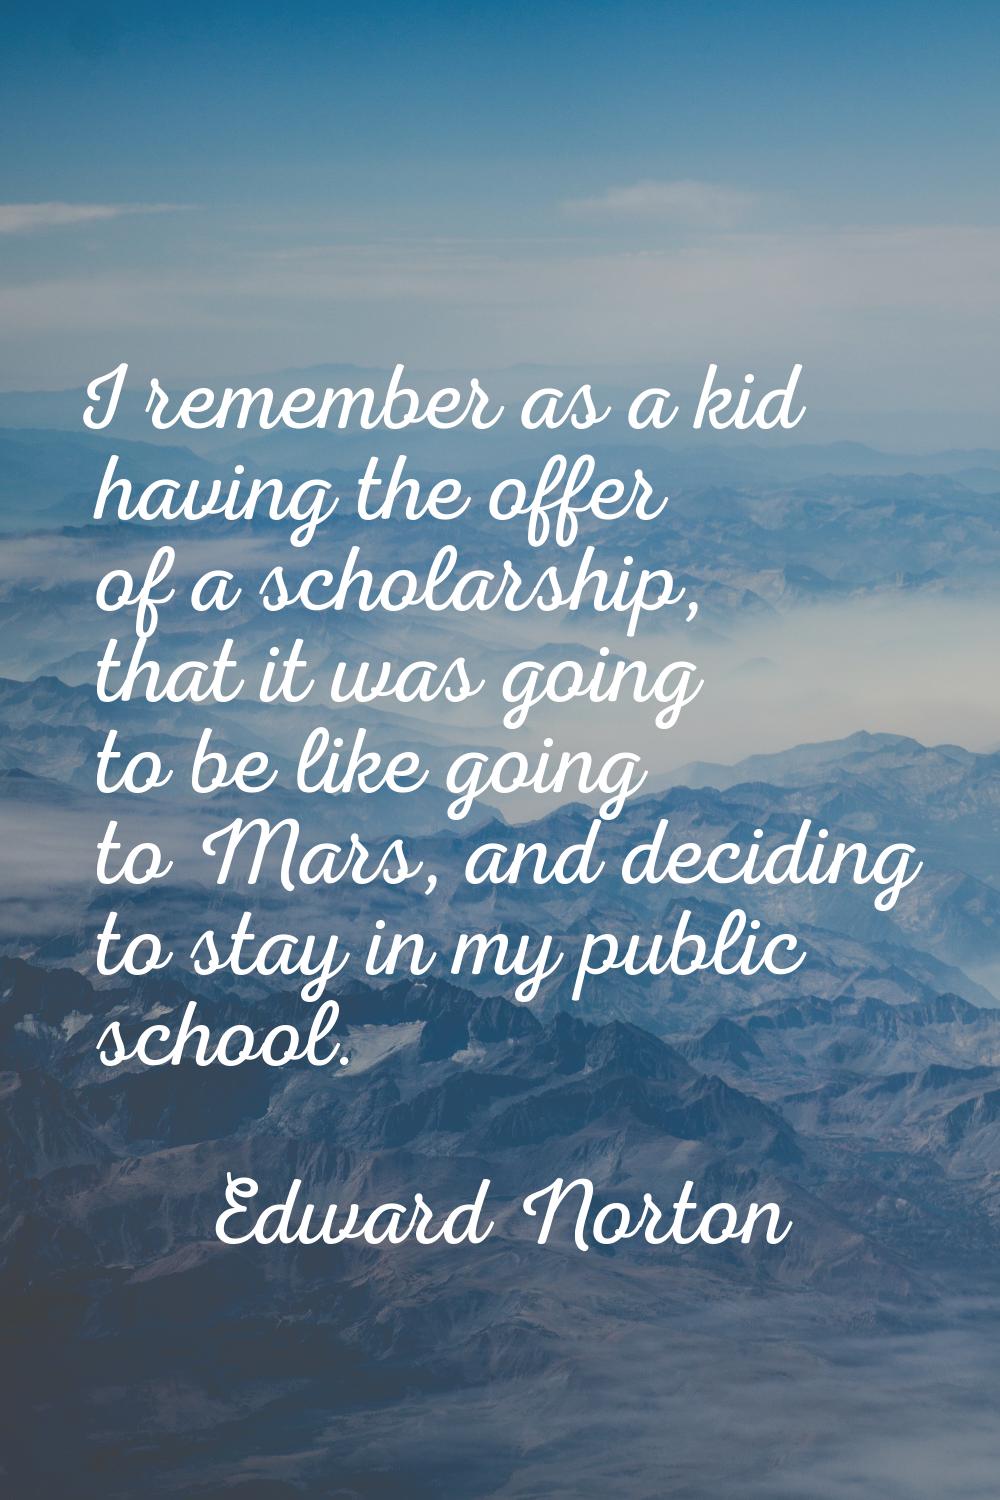 I remember as a kid having the offer of a scholarship, that it was going to be like going to Mars, 